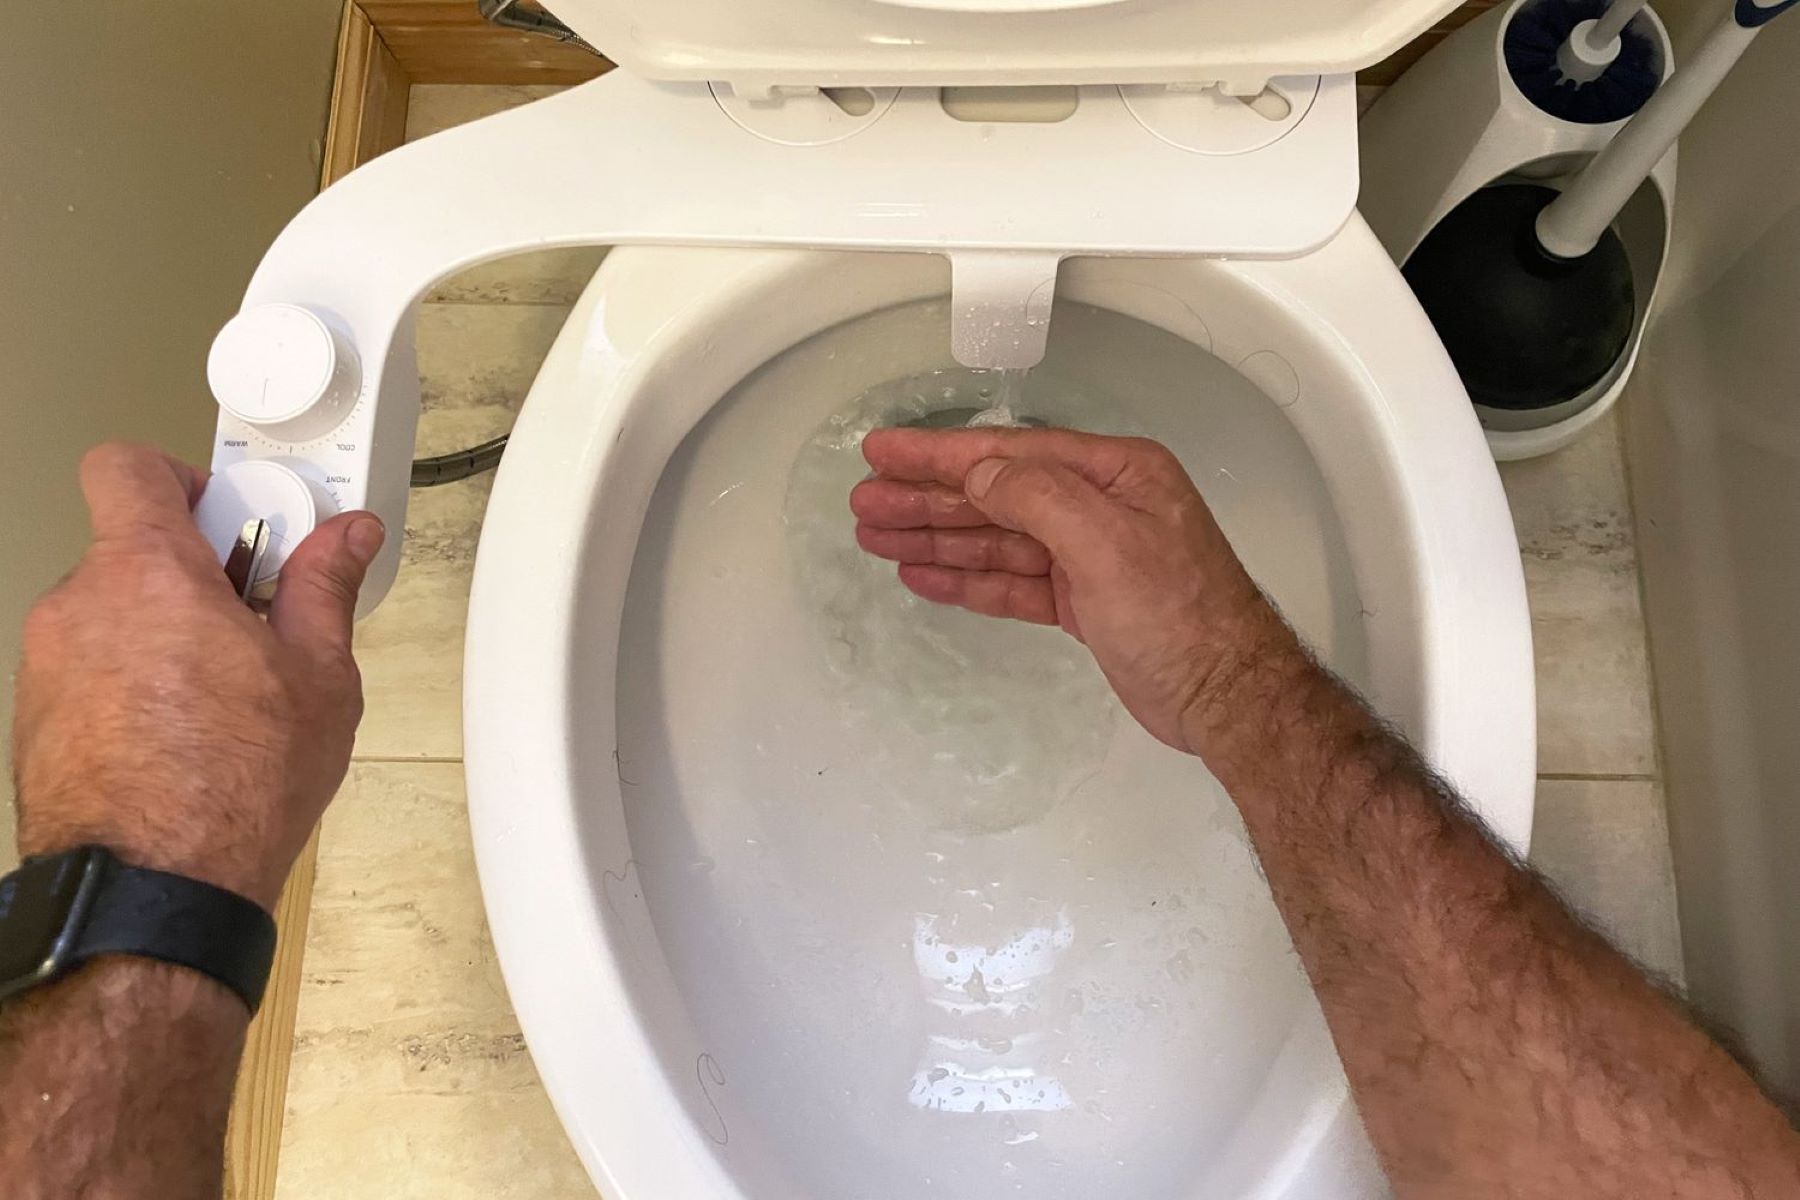 How To Use A Bidet Toilet Attachment